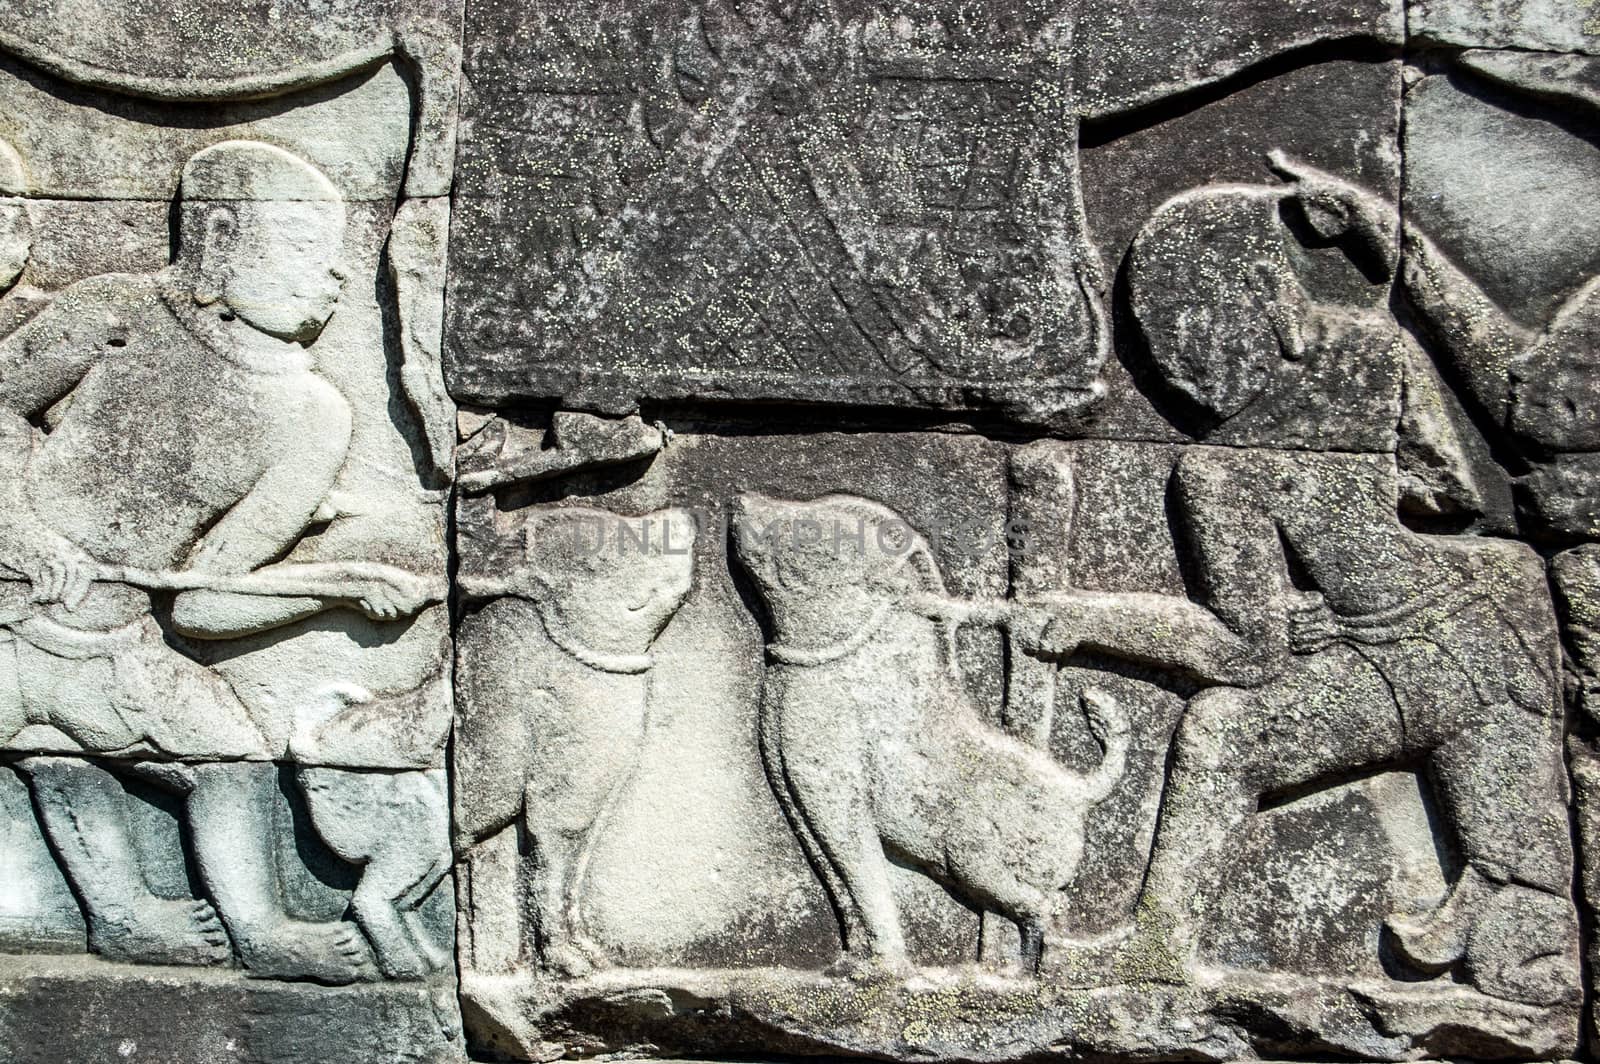 Ancient Khmer bas relief carving of two boars about to be baited into fighting. Wall of Bayon Temple, Angkor Thom, Siem Reap, Cambodia